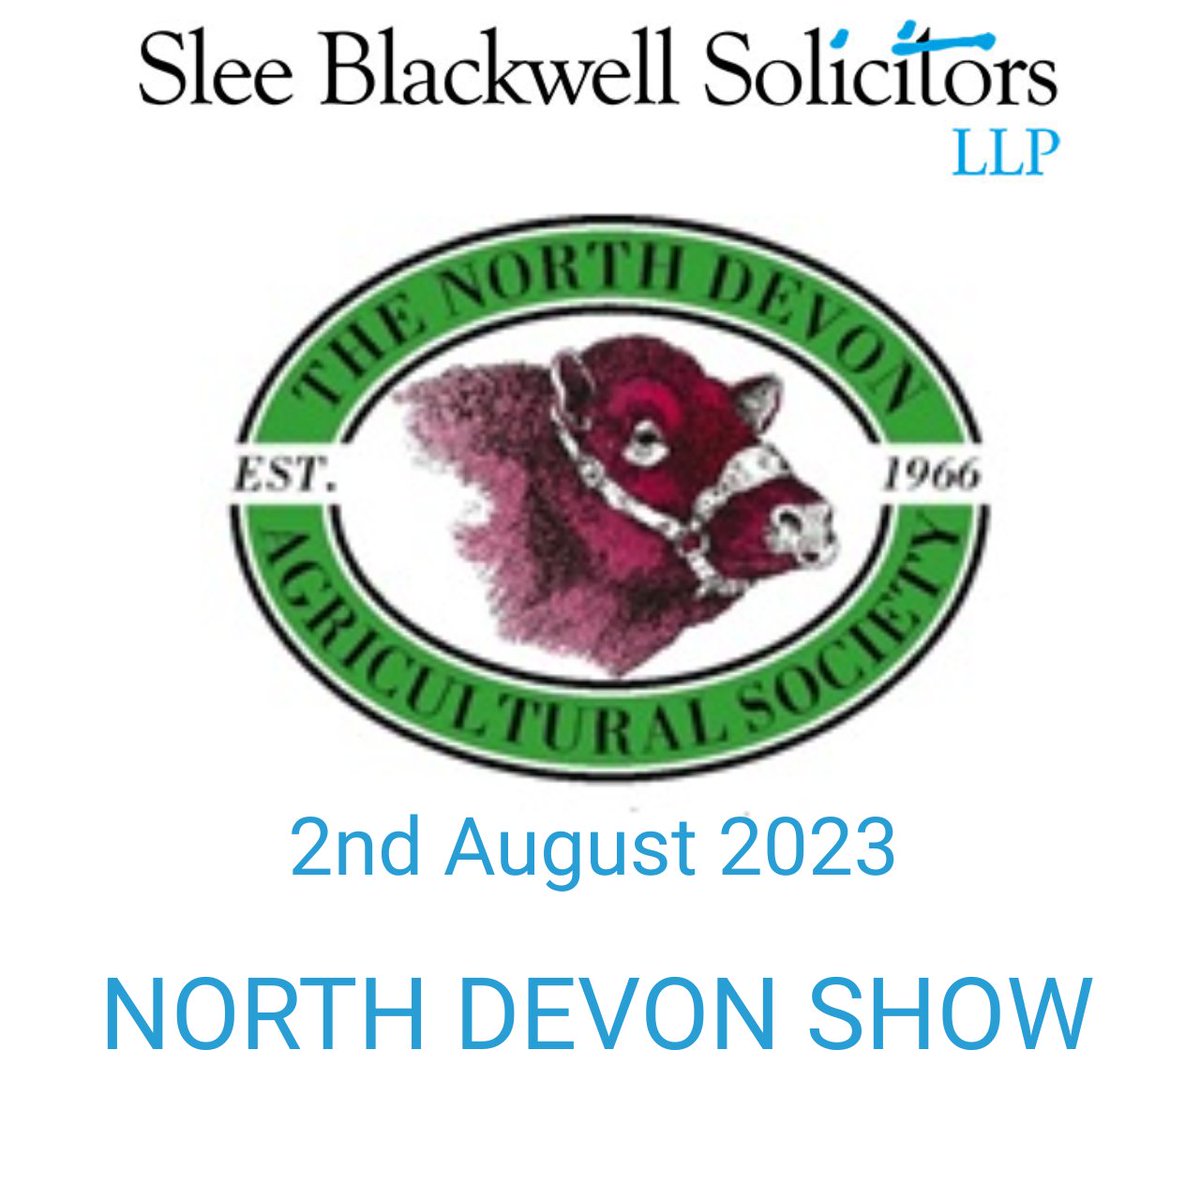 We will be at the North Devon Show on the 2nd of August. A great day celebrating all things rural with lots to do for all the family. We look forward to seeing you there.

#northdevonshow 
#devonlife 

northdevonshow.com